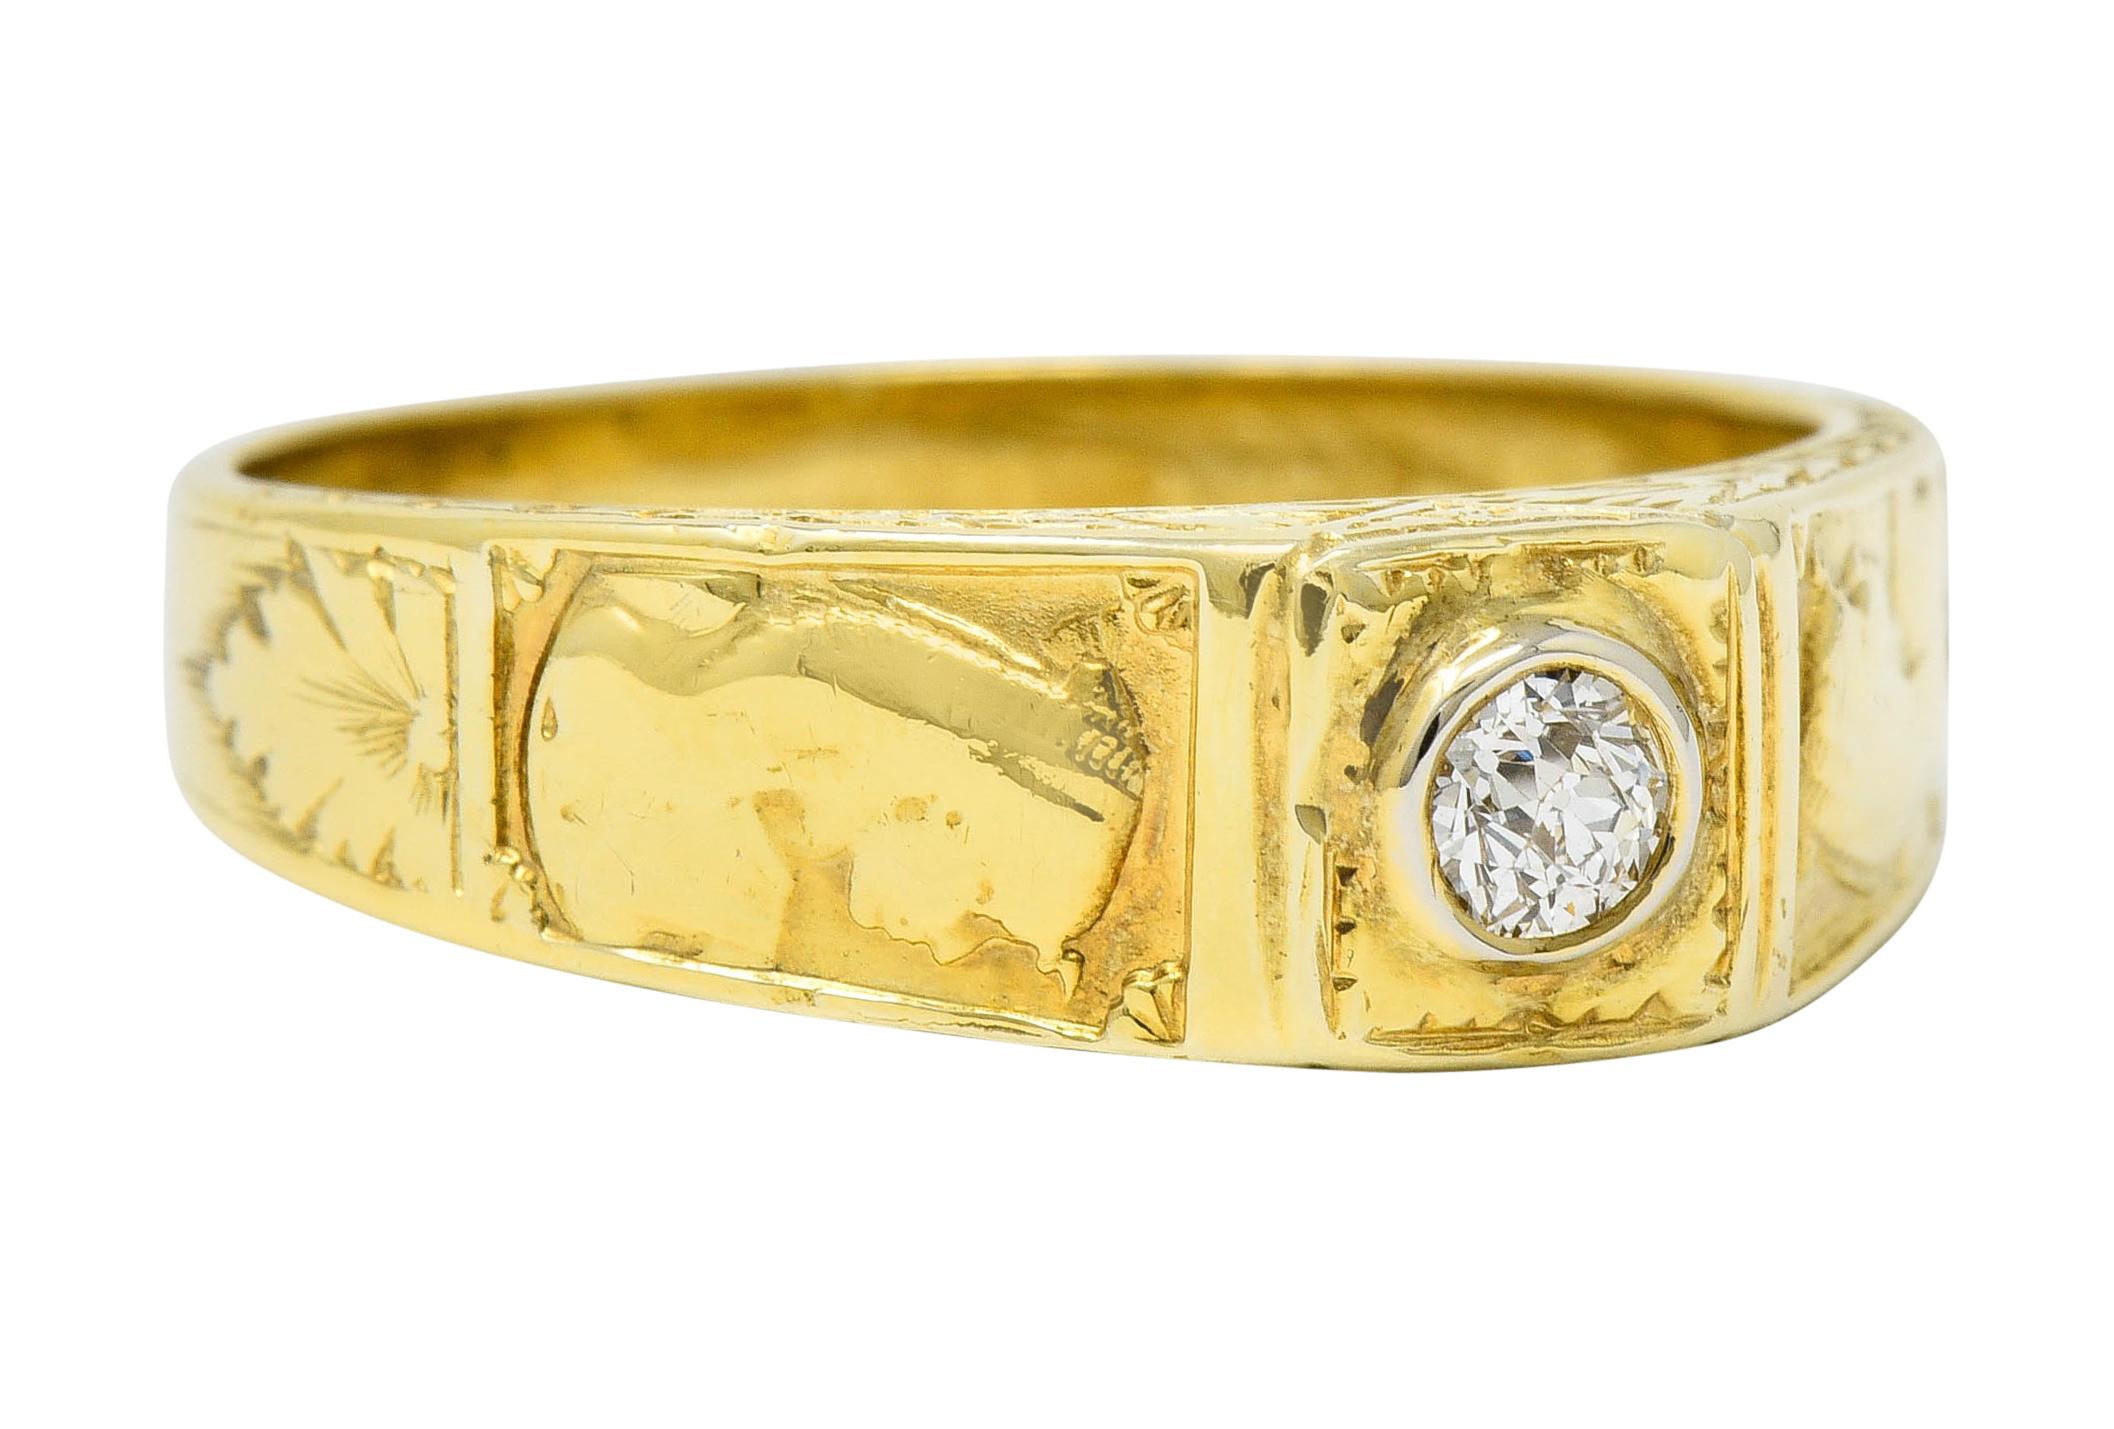 Centering an old European cut diamond weighing approximately 0.16 carat; H/I color with VS clarity

Bezel set low in mounting deeply engraved with lotus, foliate, and pharaoh profiles

Stamped 14K for 14 karat gold

Circa: 1920s

Ring Size: 9 1/4 &